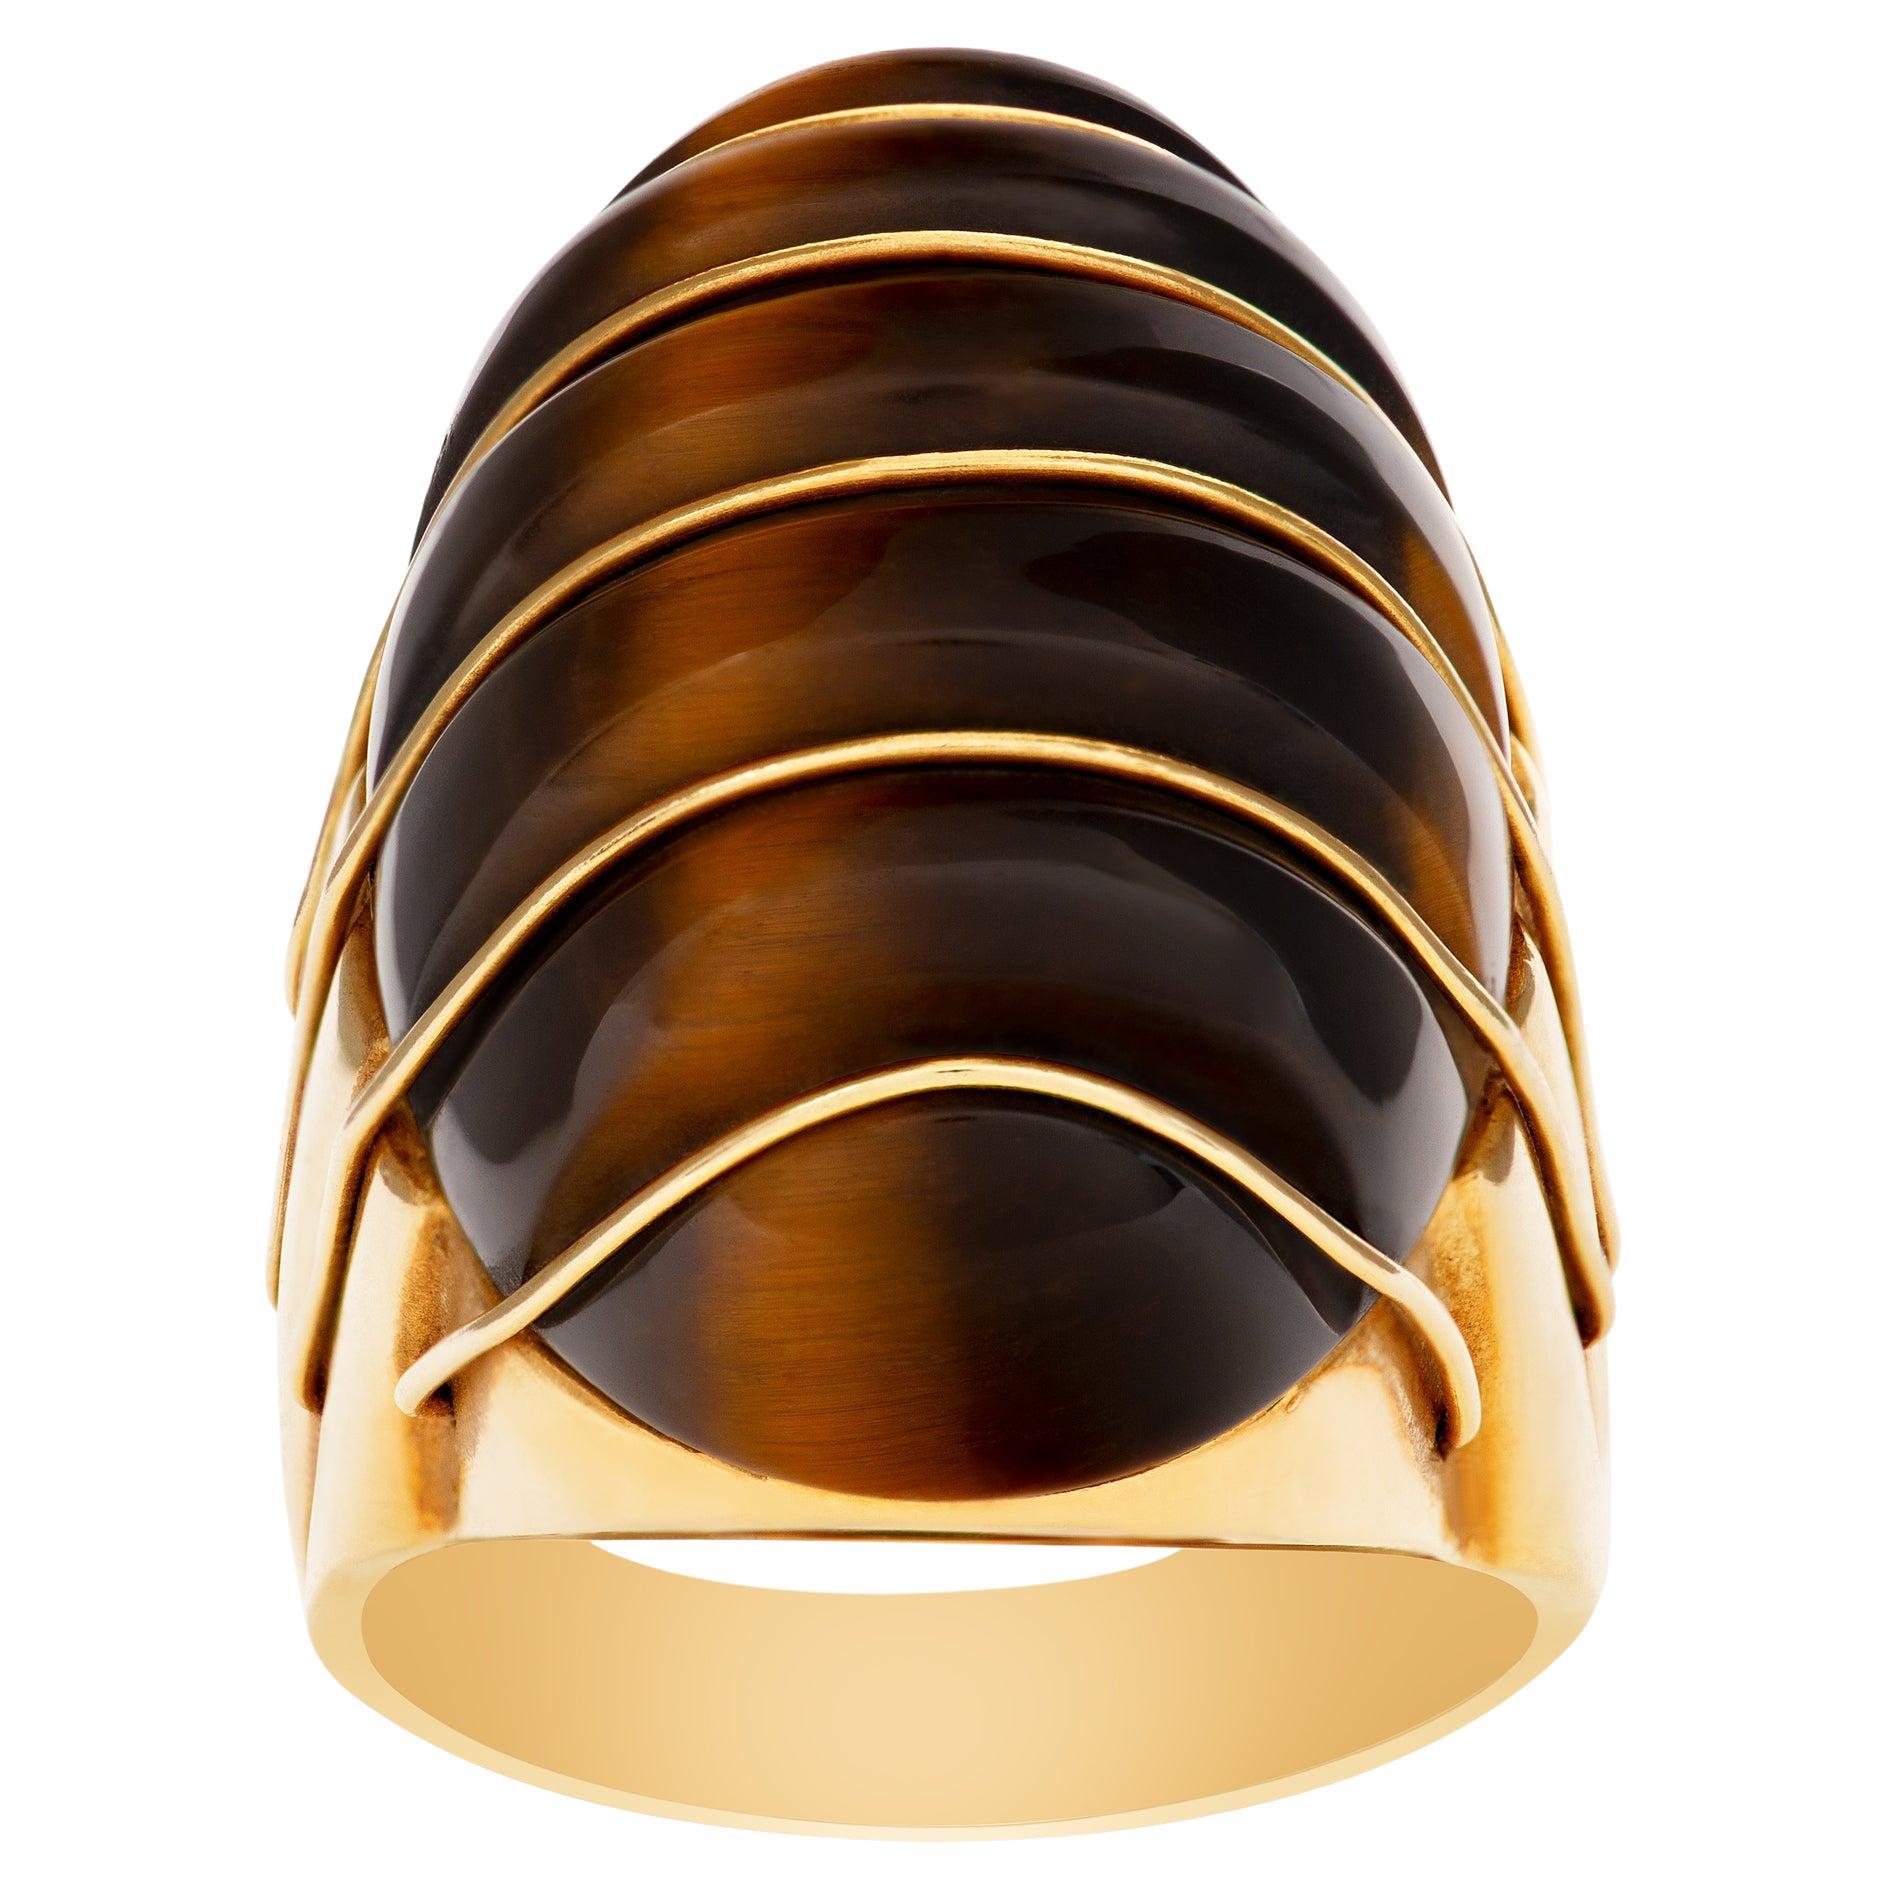 Domed Ring in 18k Gold, Cabochon Tiger Eye Style